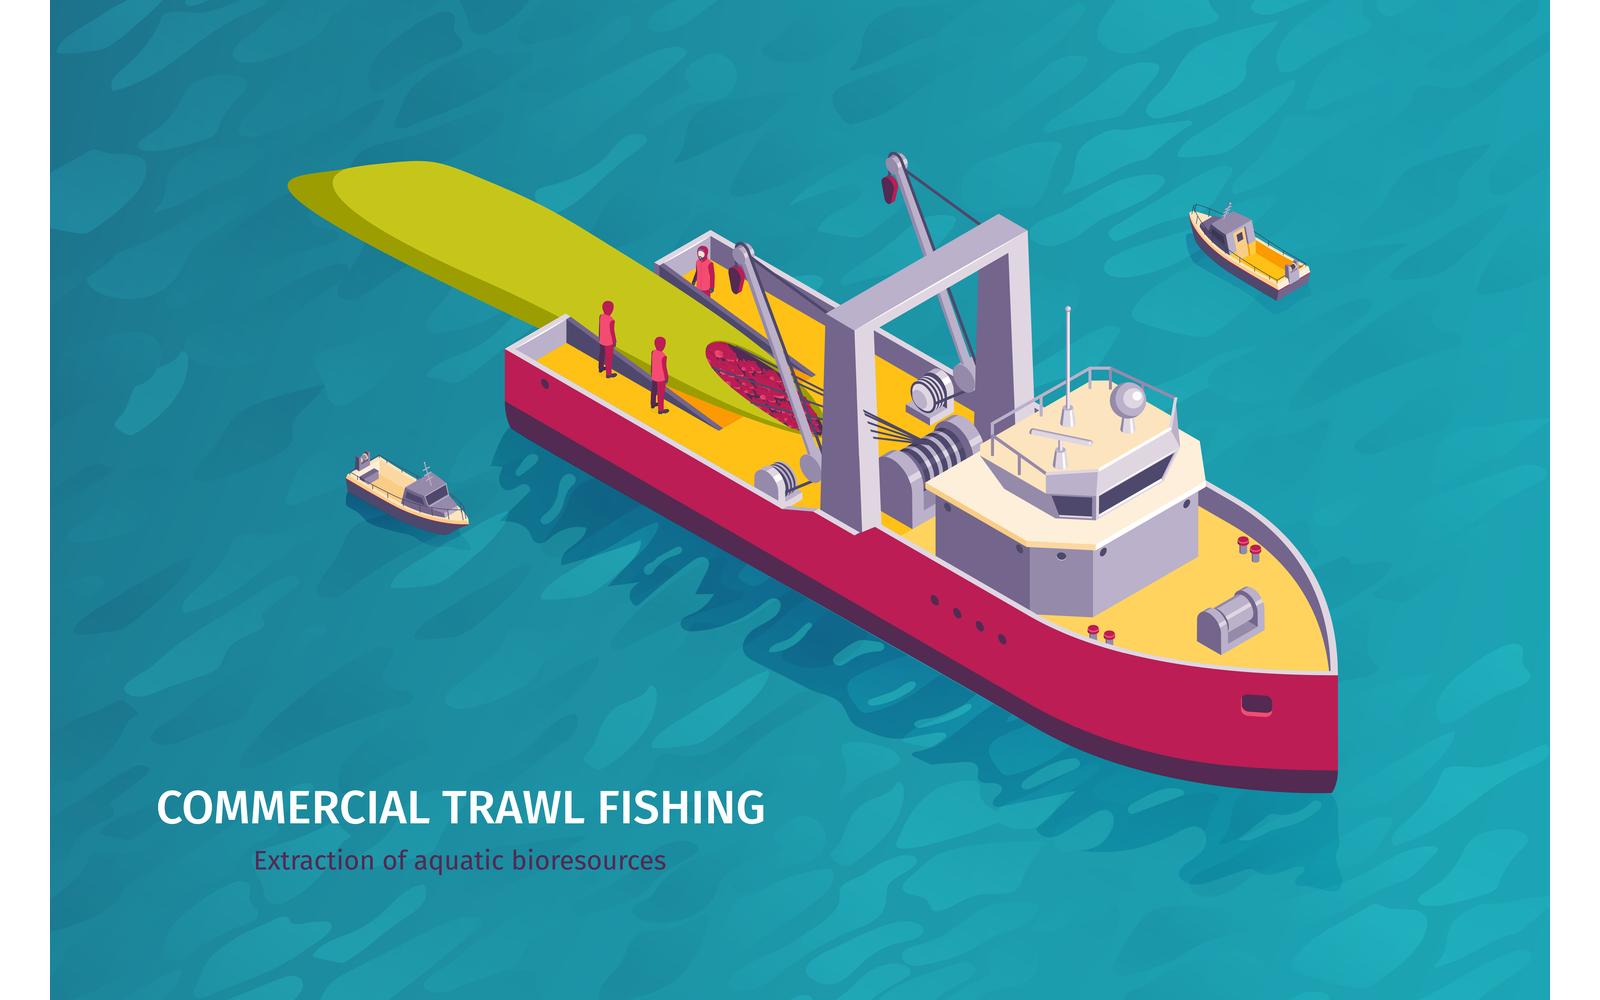 Isometric Commercial Fishing Horizontal Banner 201150410 Vector Illustration Concept